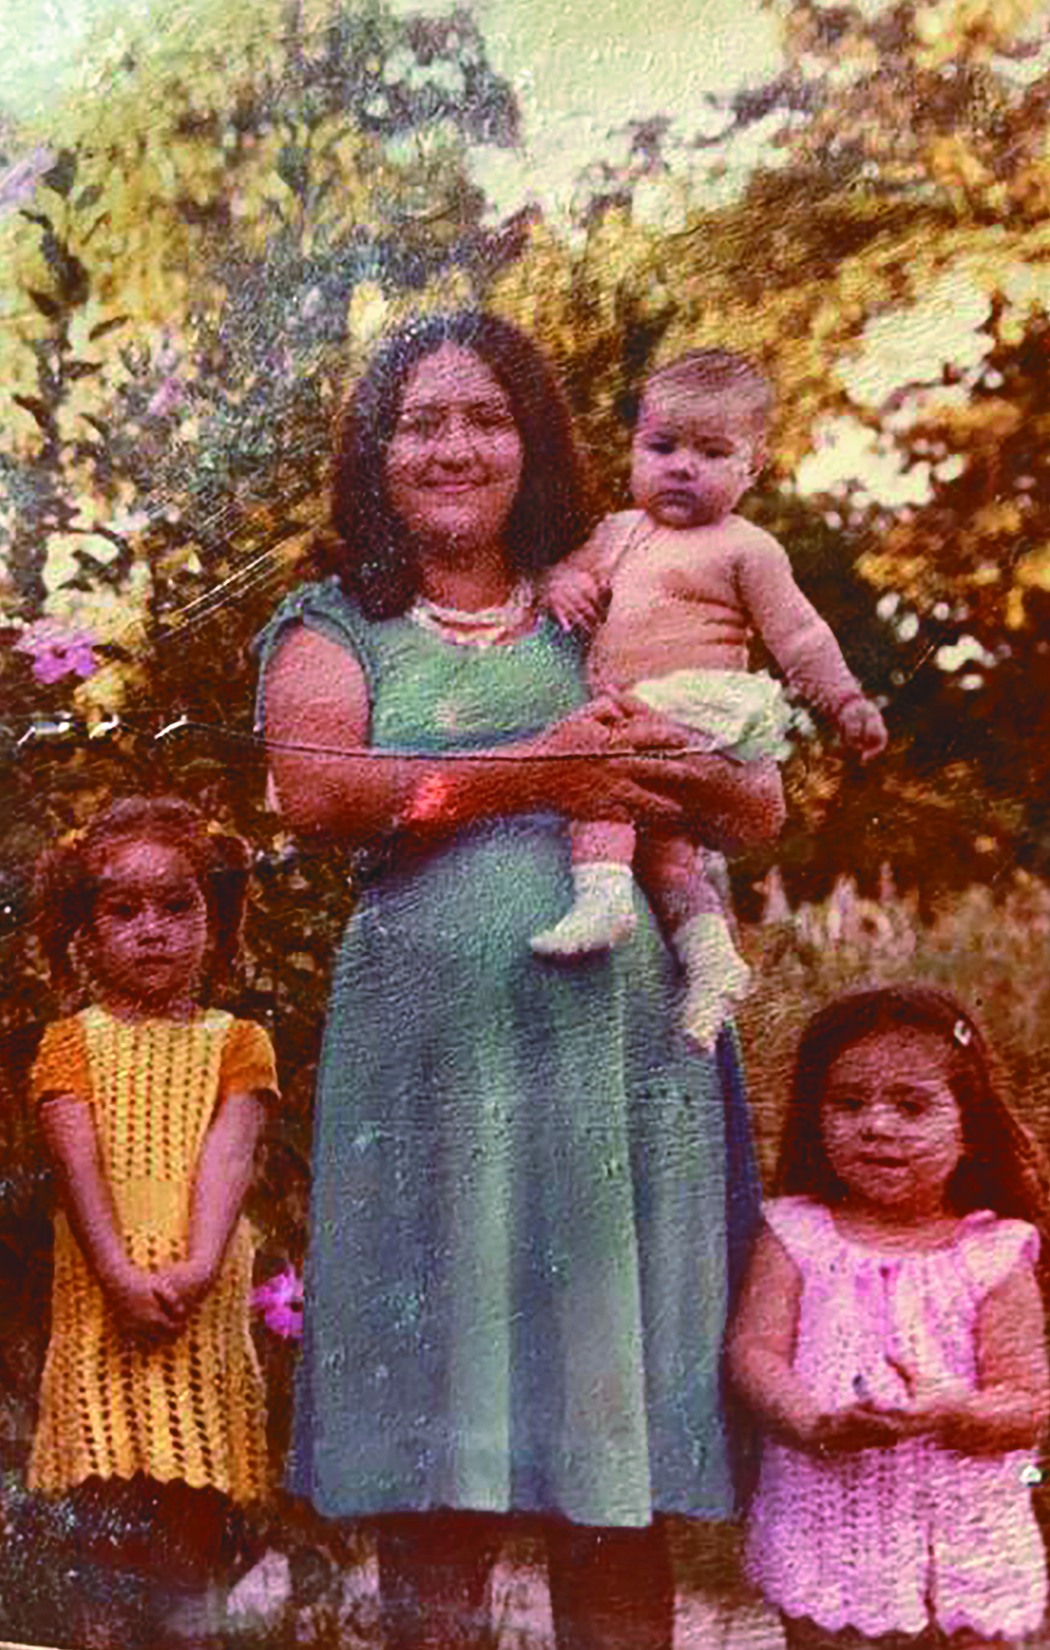 Fatima Rivas as a baby with her mother and two older sisters